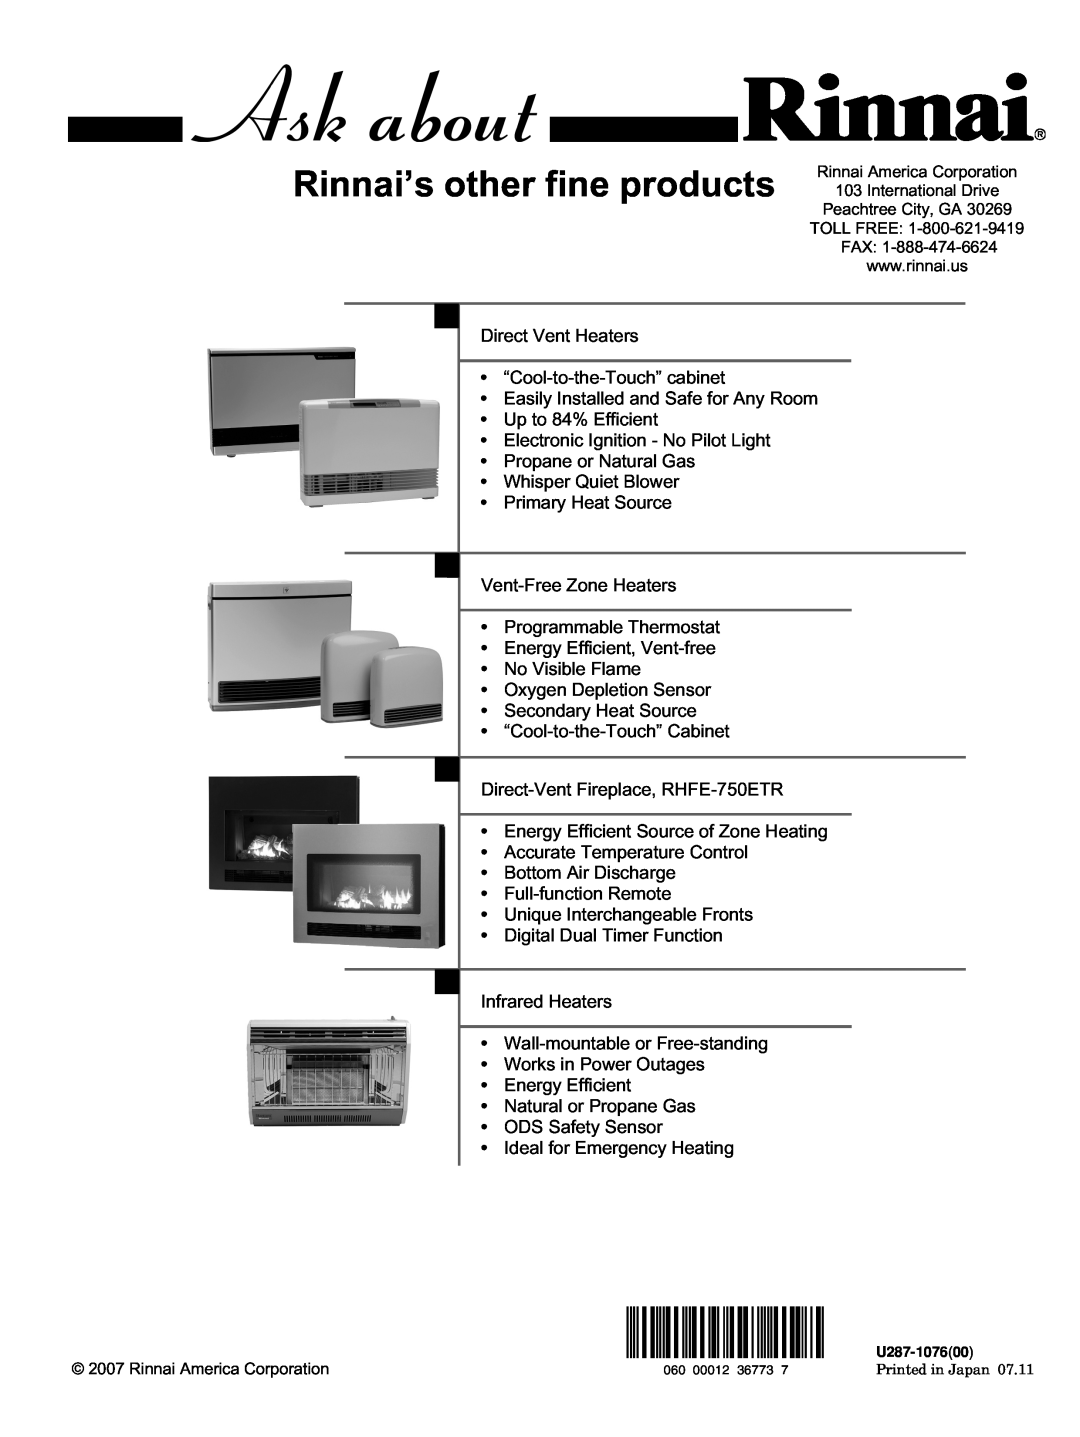 Rinnai R98LSe, R63LSe, R94LSe, R75LSe installation manual Direct Vent Heaters “Cool-to-the-Touch”cabinet 